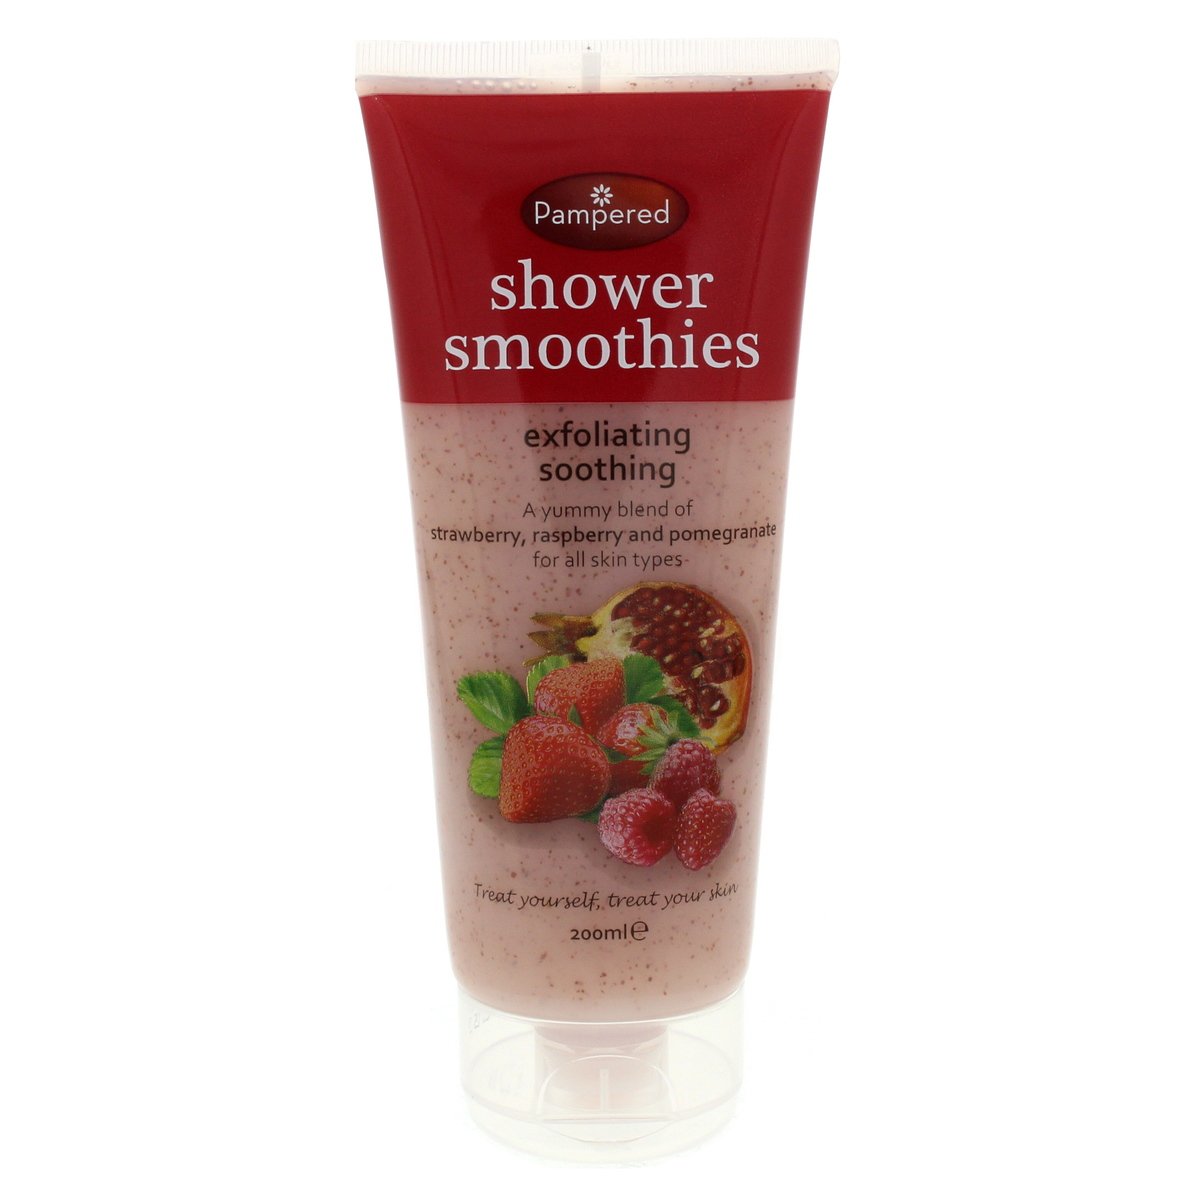 Pampered Exfoliating Soothing Strawberry Raspberry And Pomegranate Shower Smoothies 200 ml